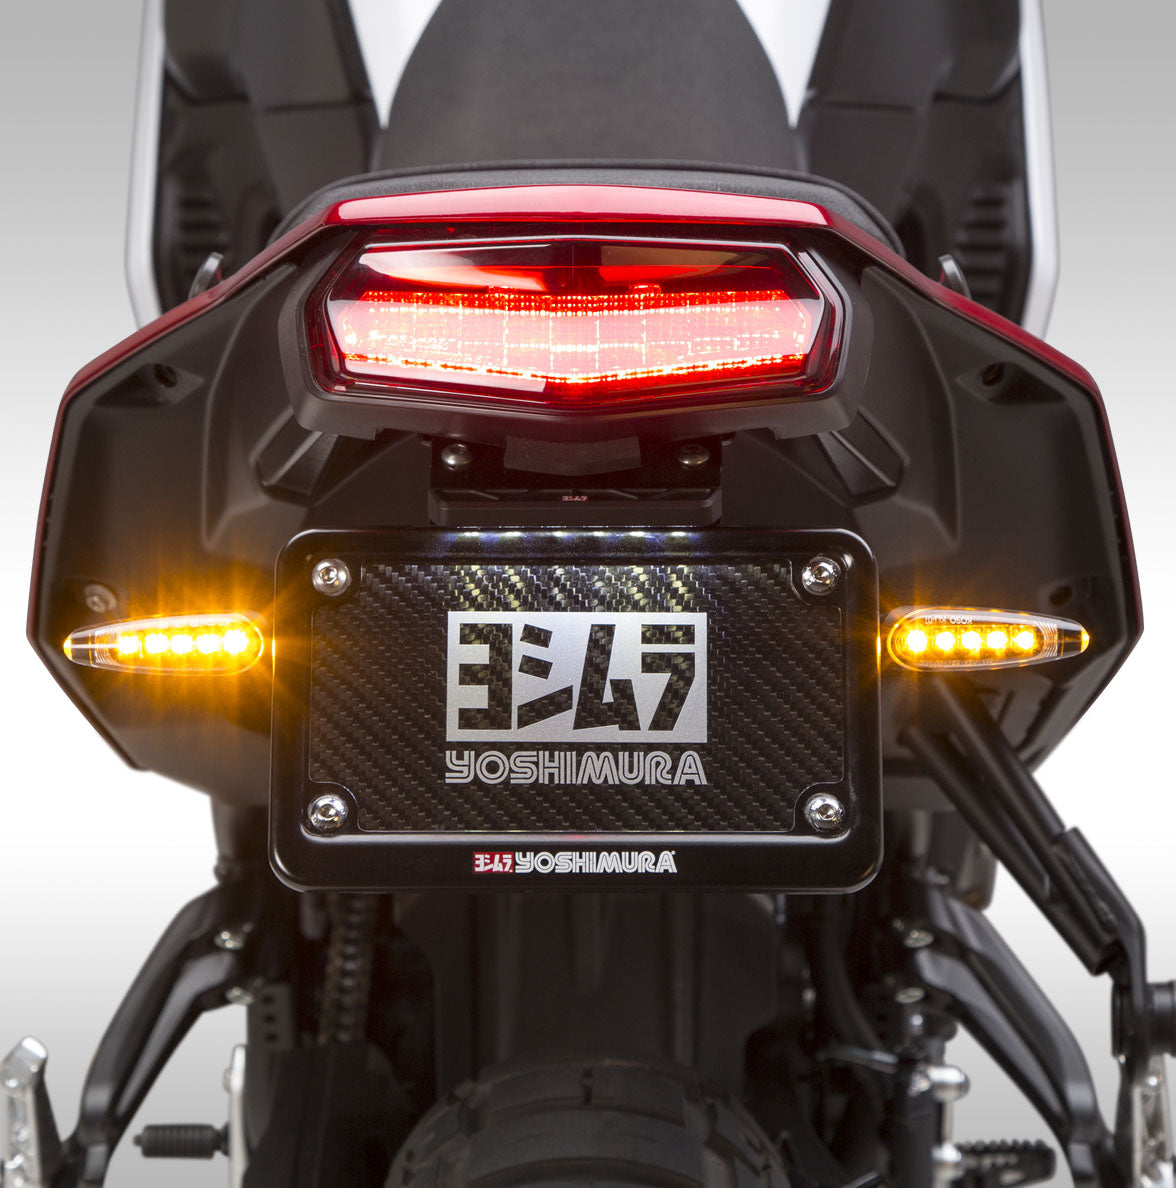 Clean up the rear fender of your Tenere 700 with the Yoshimura rear fender eliminator kit. Tenere 700 tail tidy kit. Kit incorporates Shrink Solder Connectors and a new and improved weather tight light housing, and brighter DOT compliant LED light. Made in the USA!